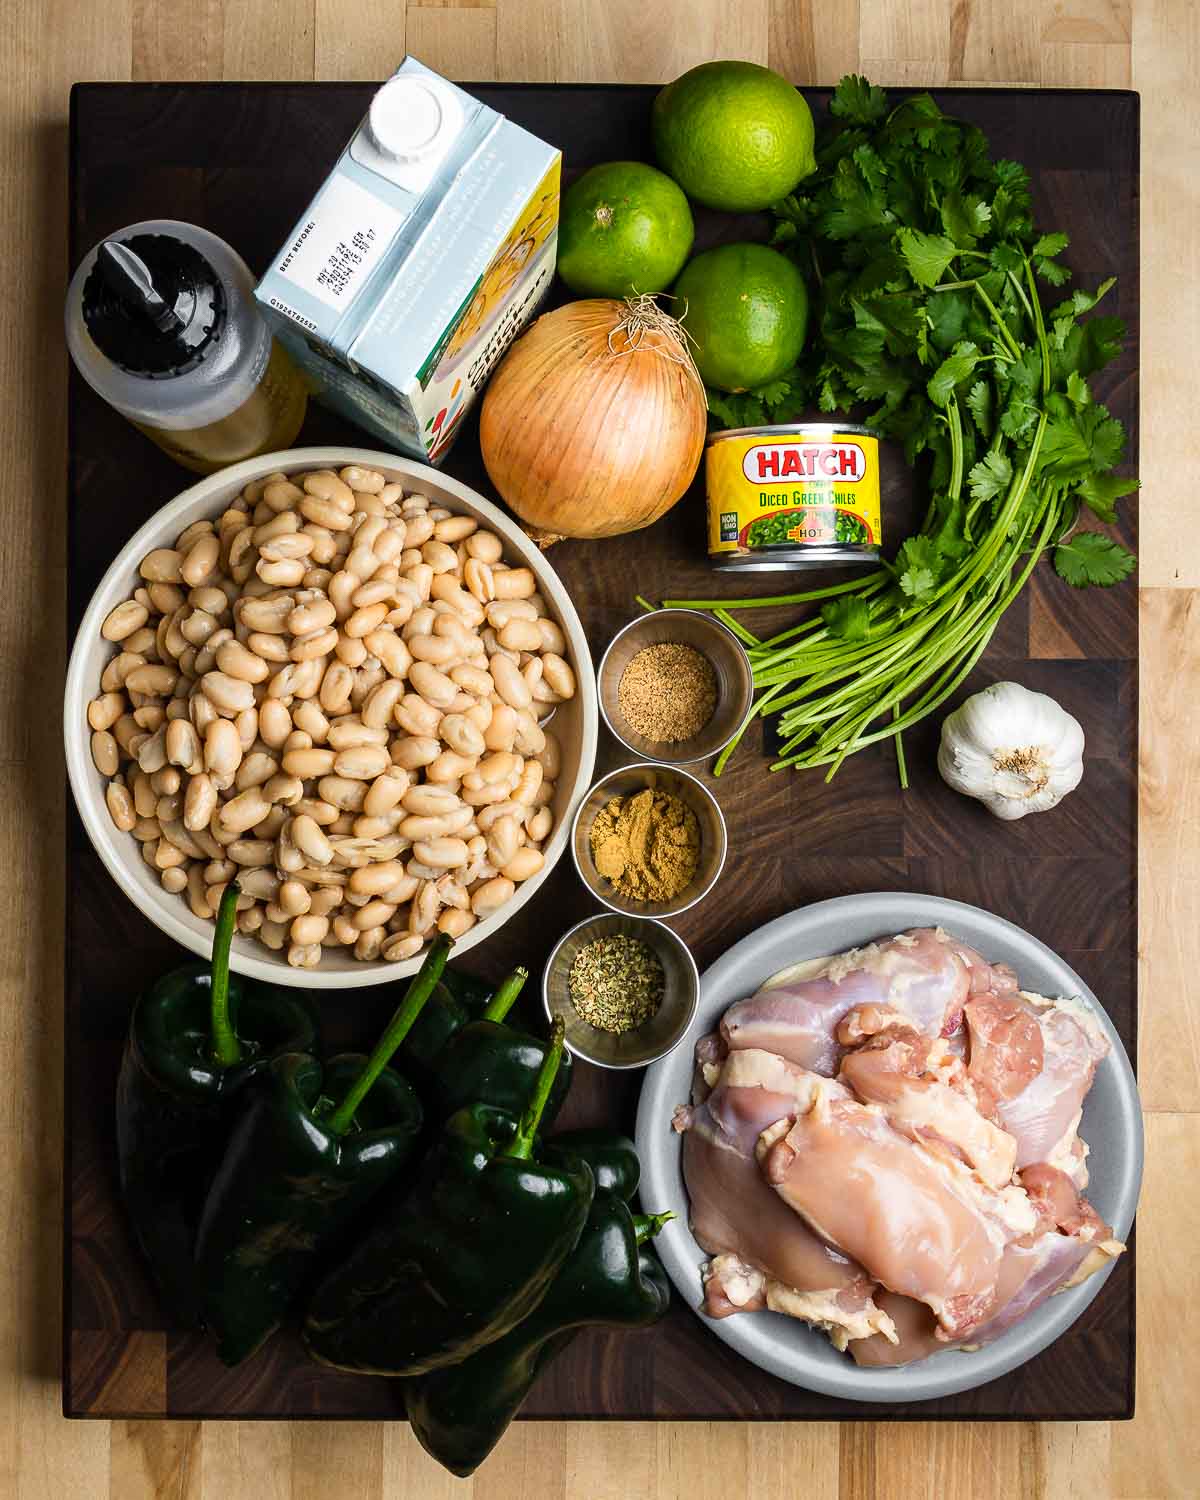 Ingredients shown: olive oil, chicken stock, onions, limes, cilantro, chiles, white beans, spices, garlic, and chicken thighs.